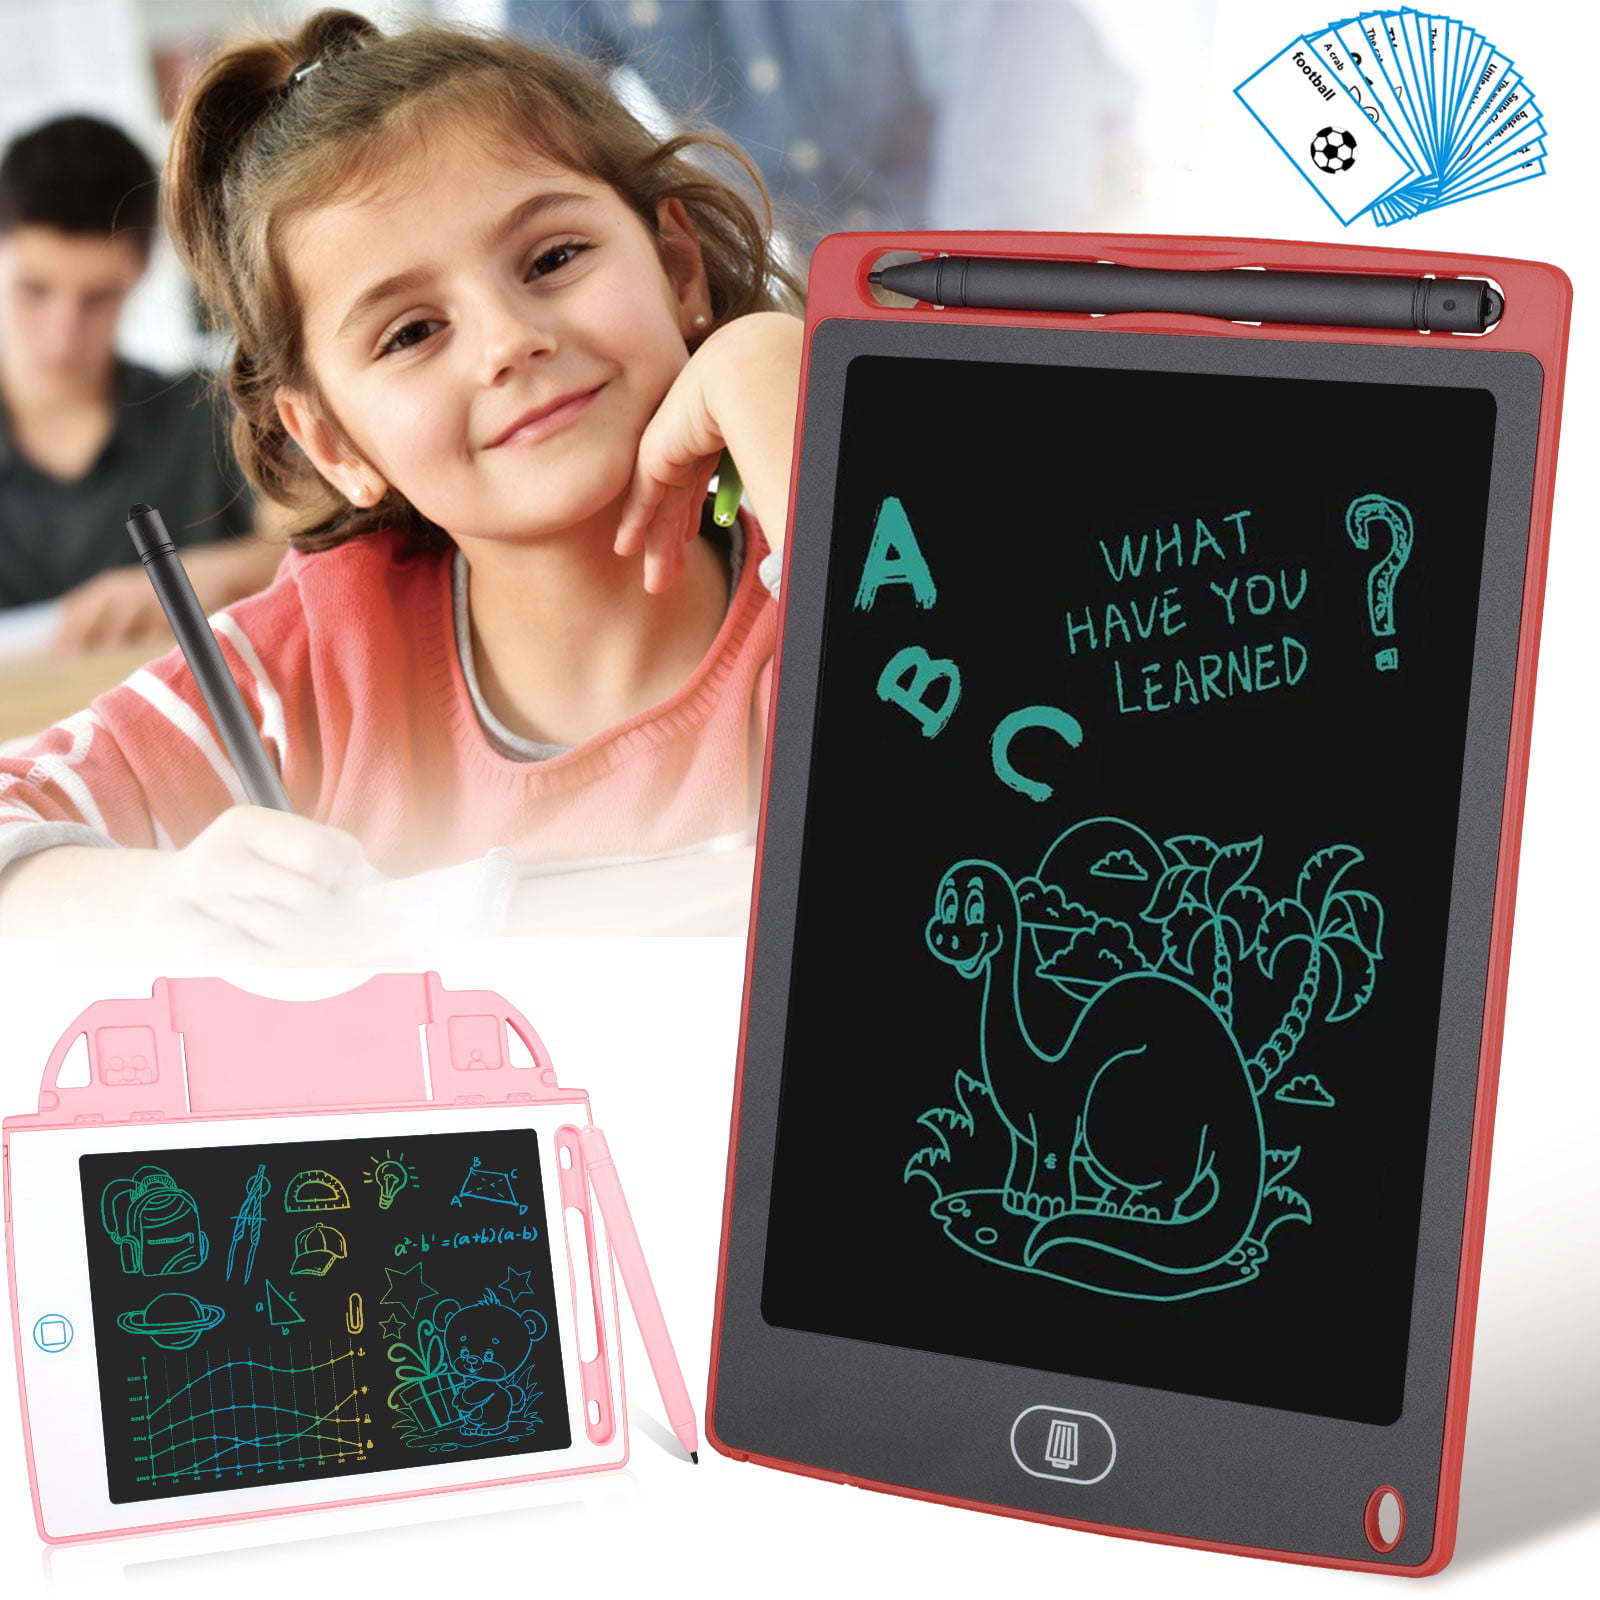 4.5inch LCD Writing Tablet,Multi-Functional Ultra-thin Writing Drawing Notebook Board Handwriting Board Electronic Writing &Drawing Doodle Board for Children/Kids Memo List Reminder Note Black